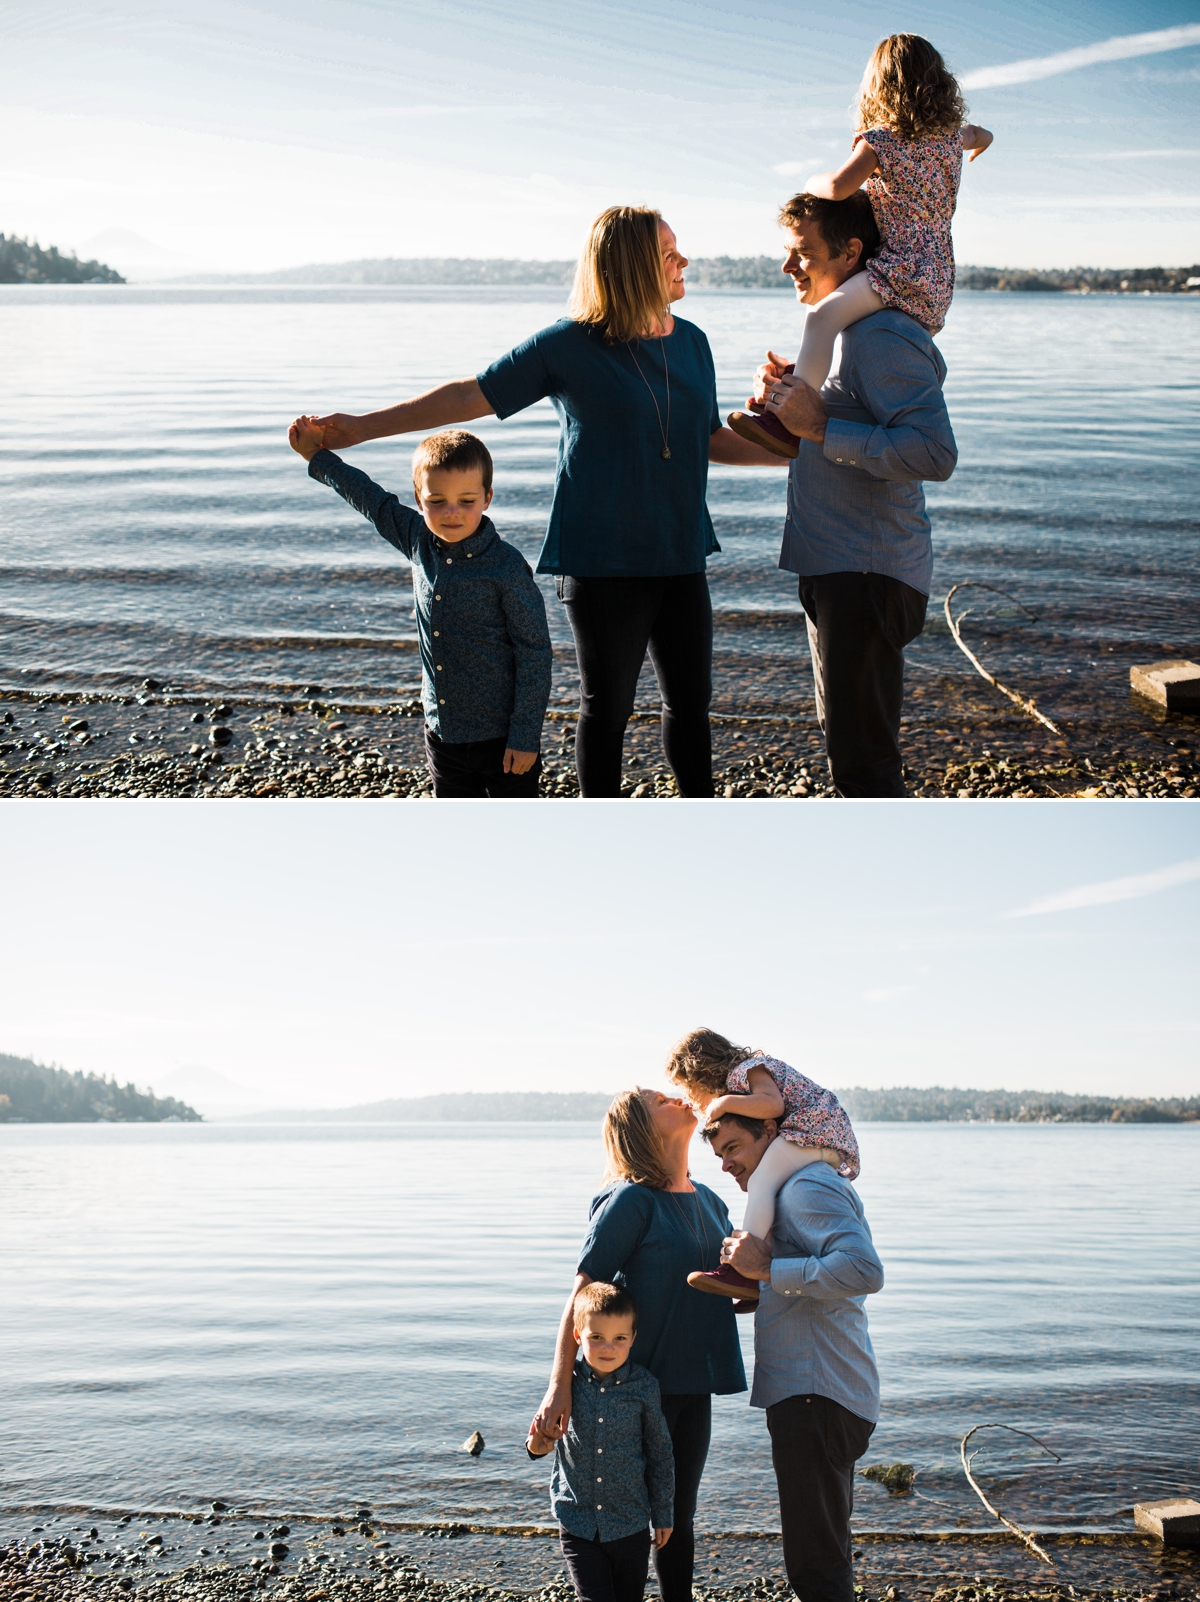 Elena S Blair Photography | Seattle family outdoors | Connected and emotive family photography